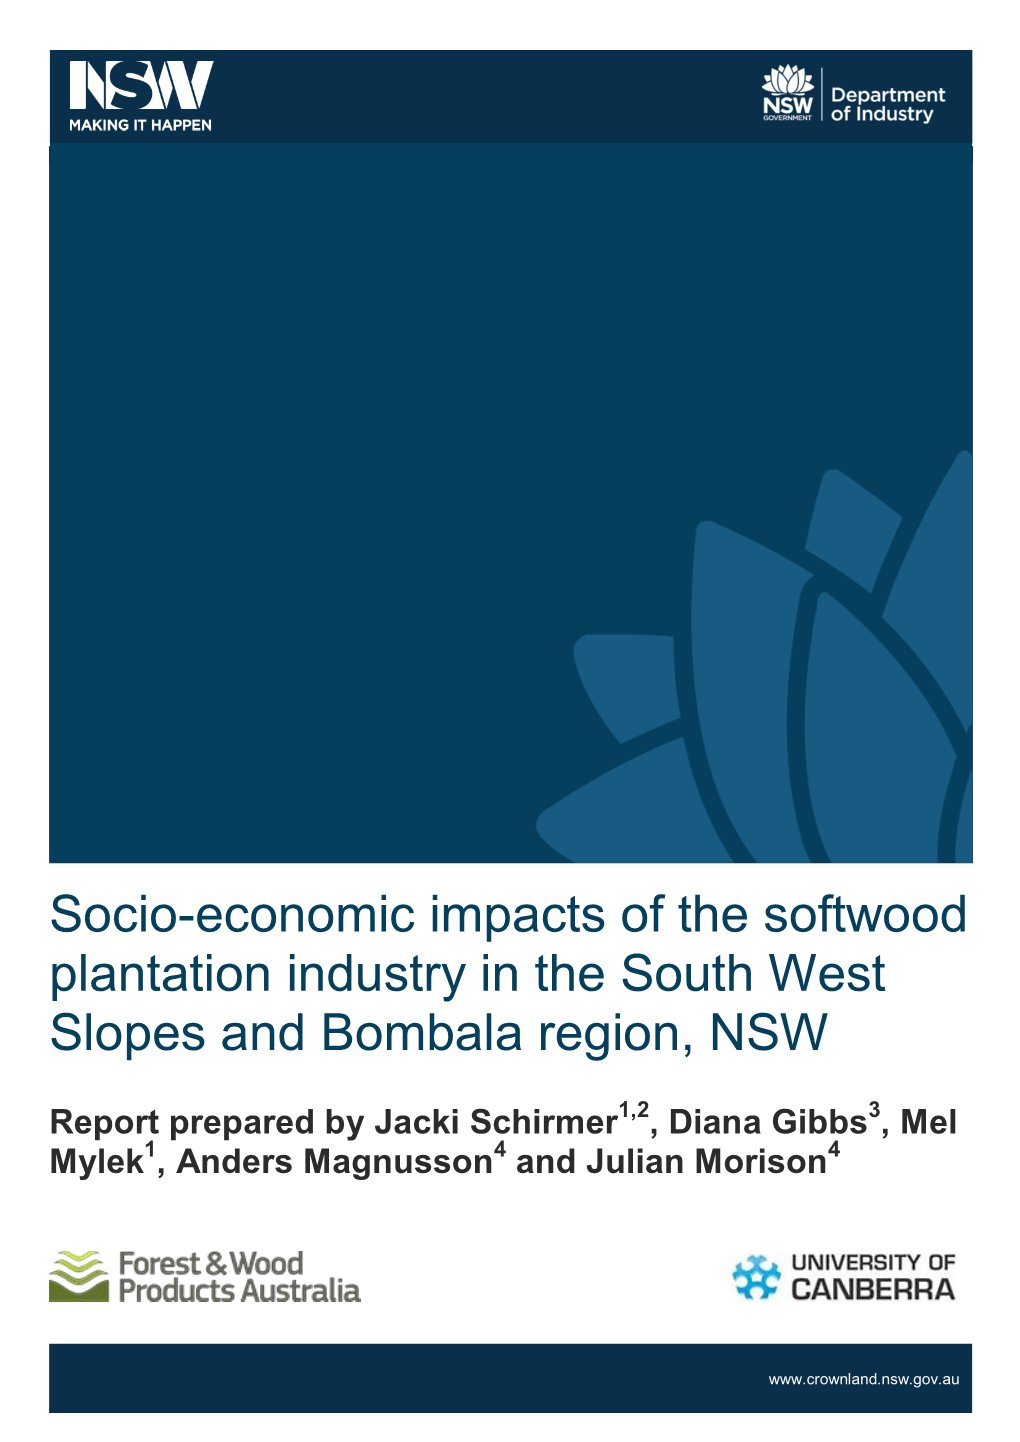 Socio-Economic Impacts of the Softwood Plantation Industry in the South West Slopes and Bombala Region, NSW